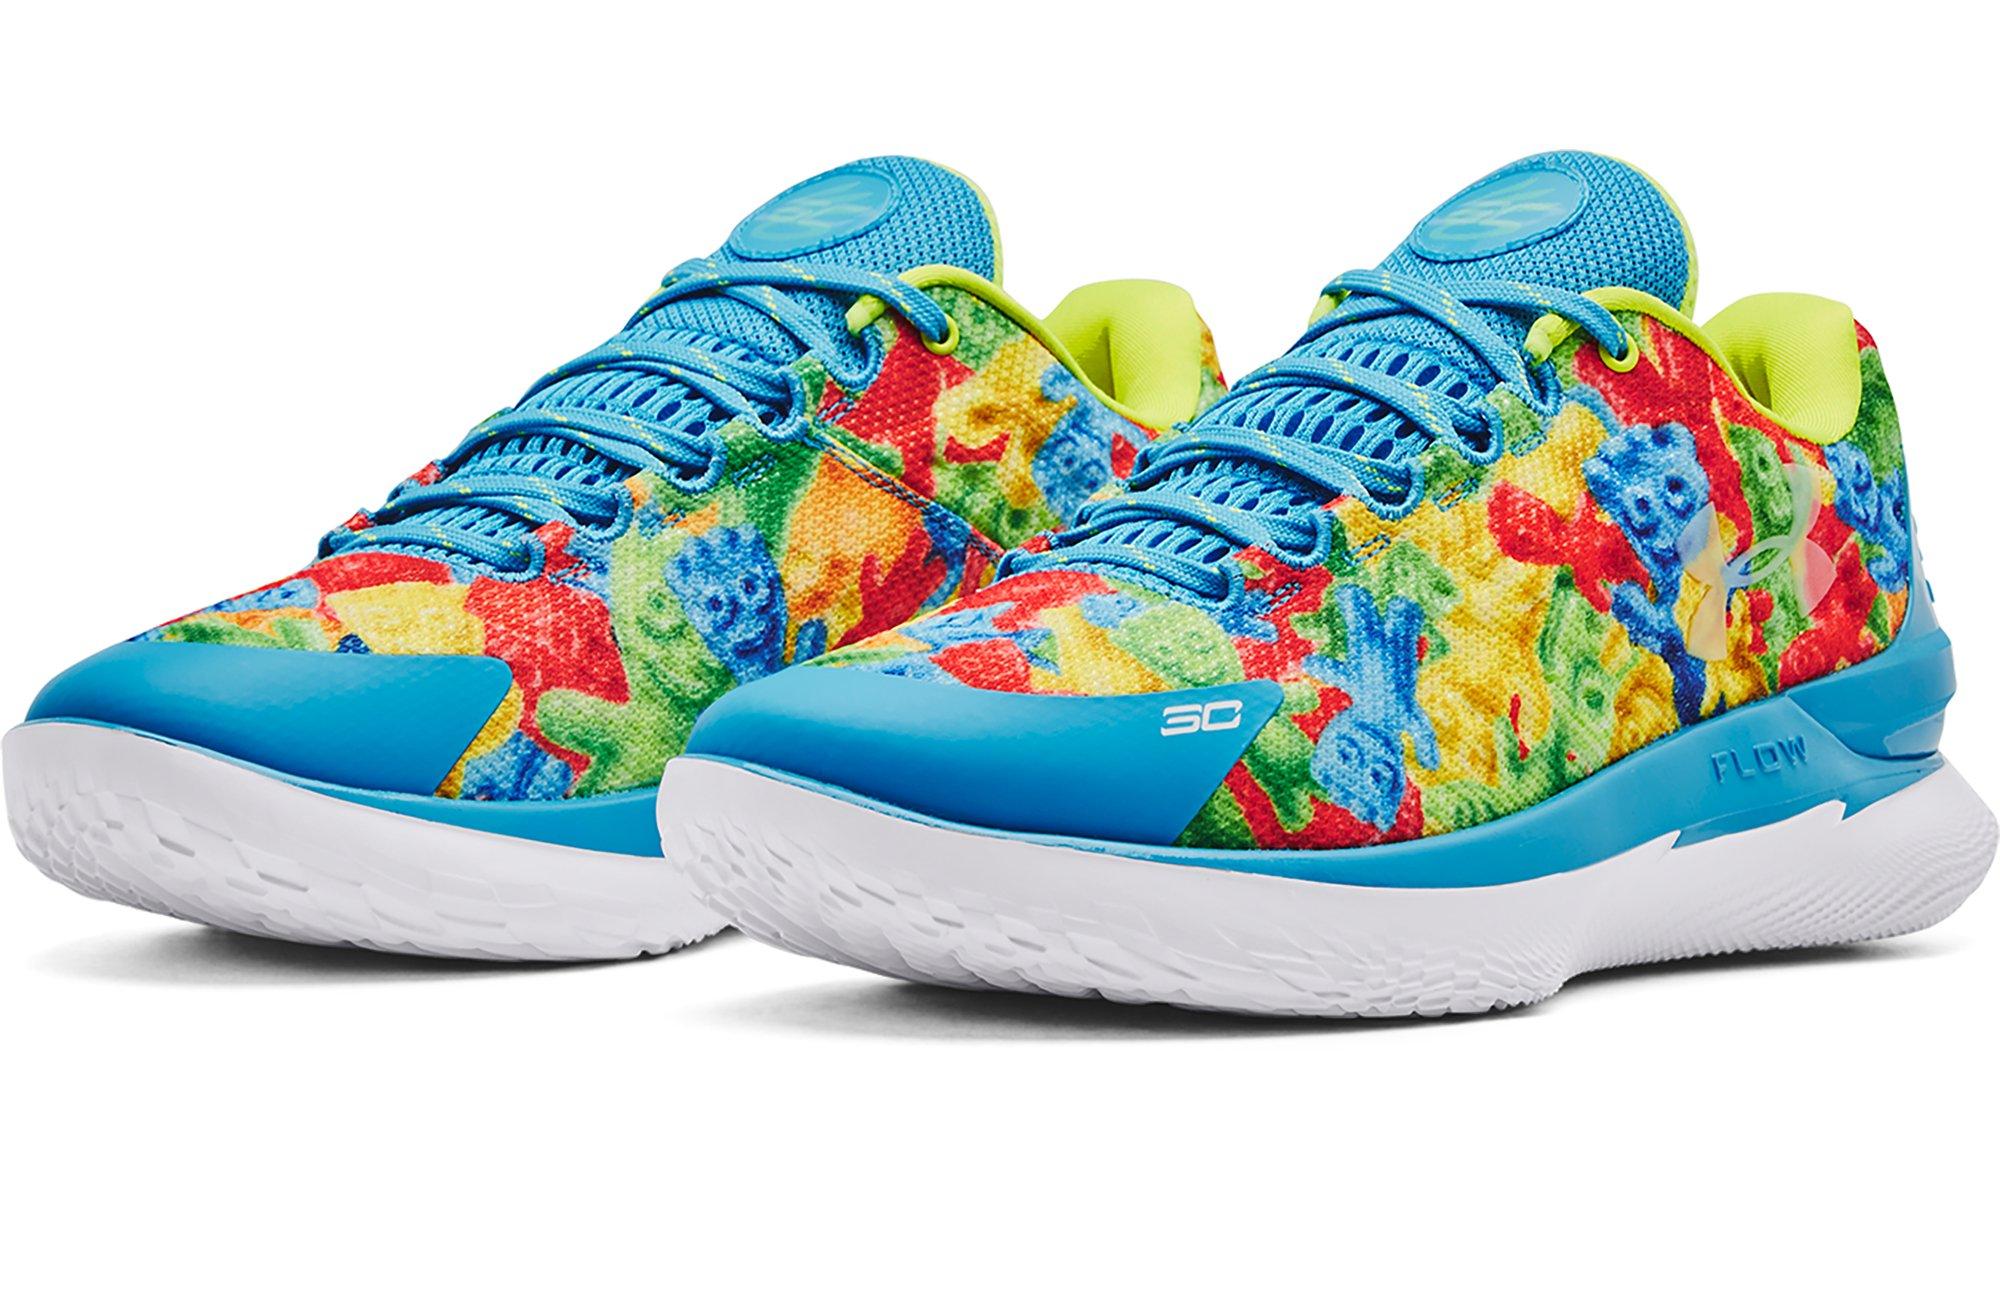 Sneakers Release – Under Armour Curry 10 “Sour Patch” Men’s Basketball ...